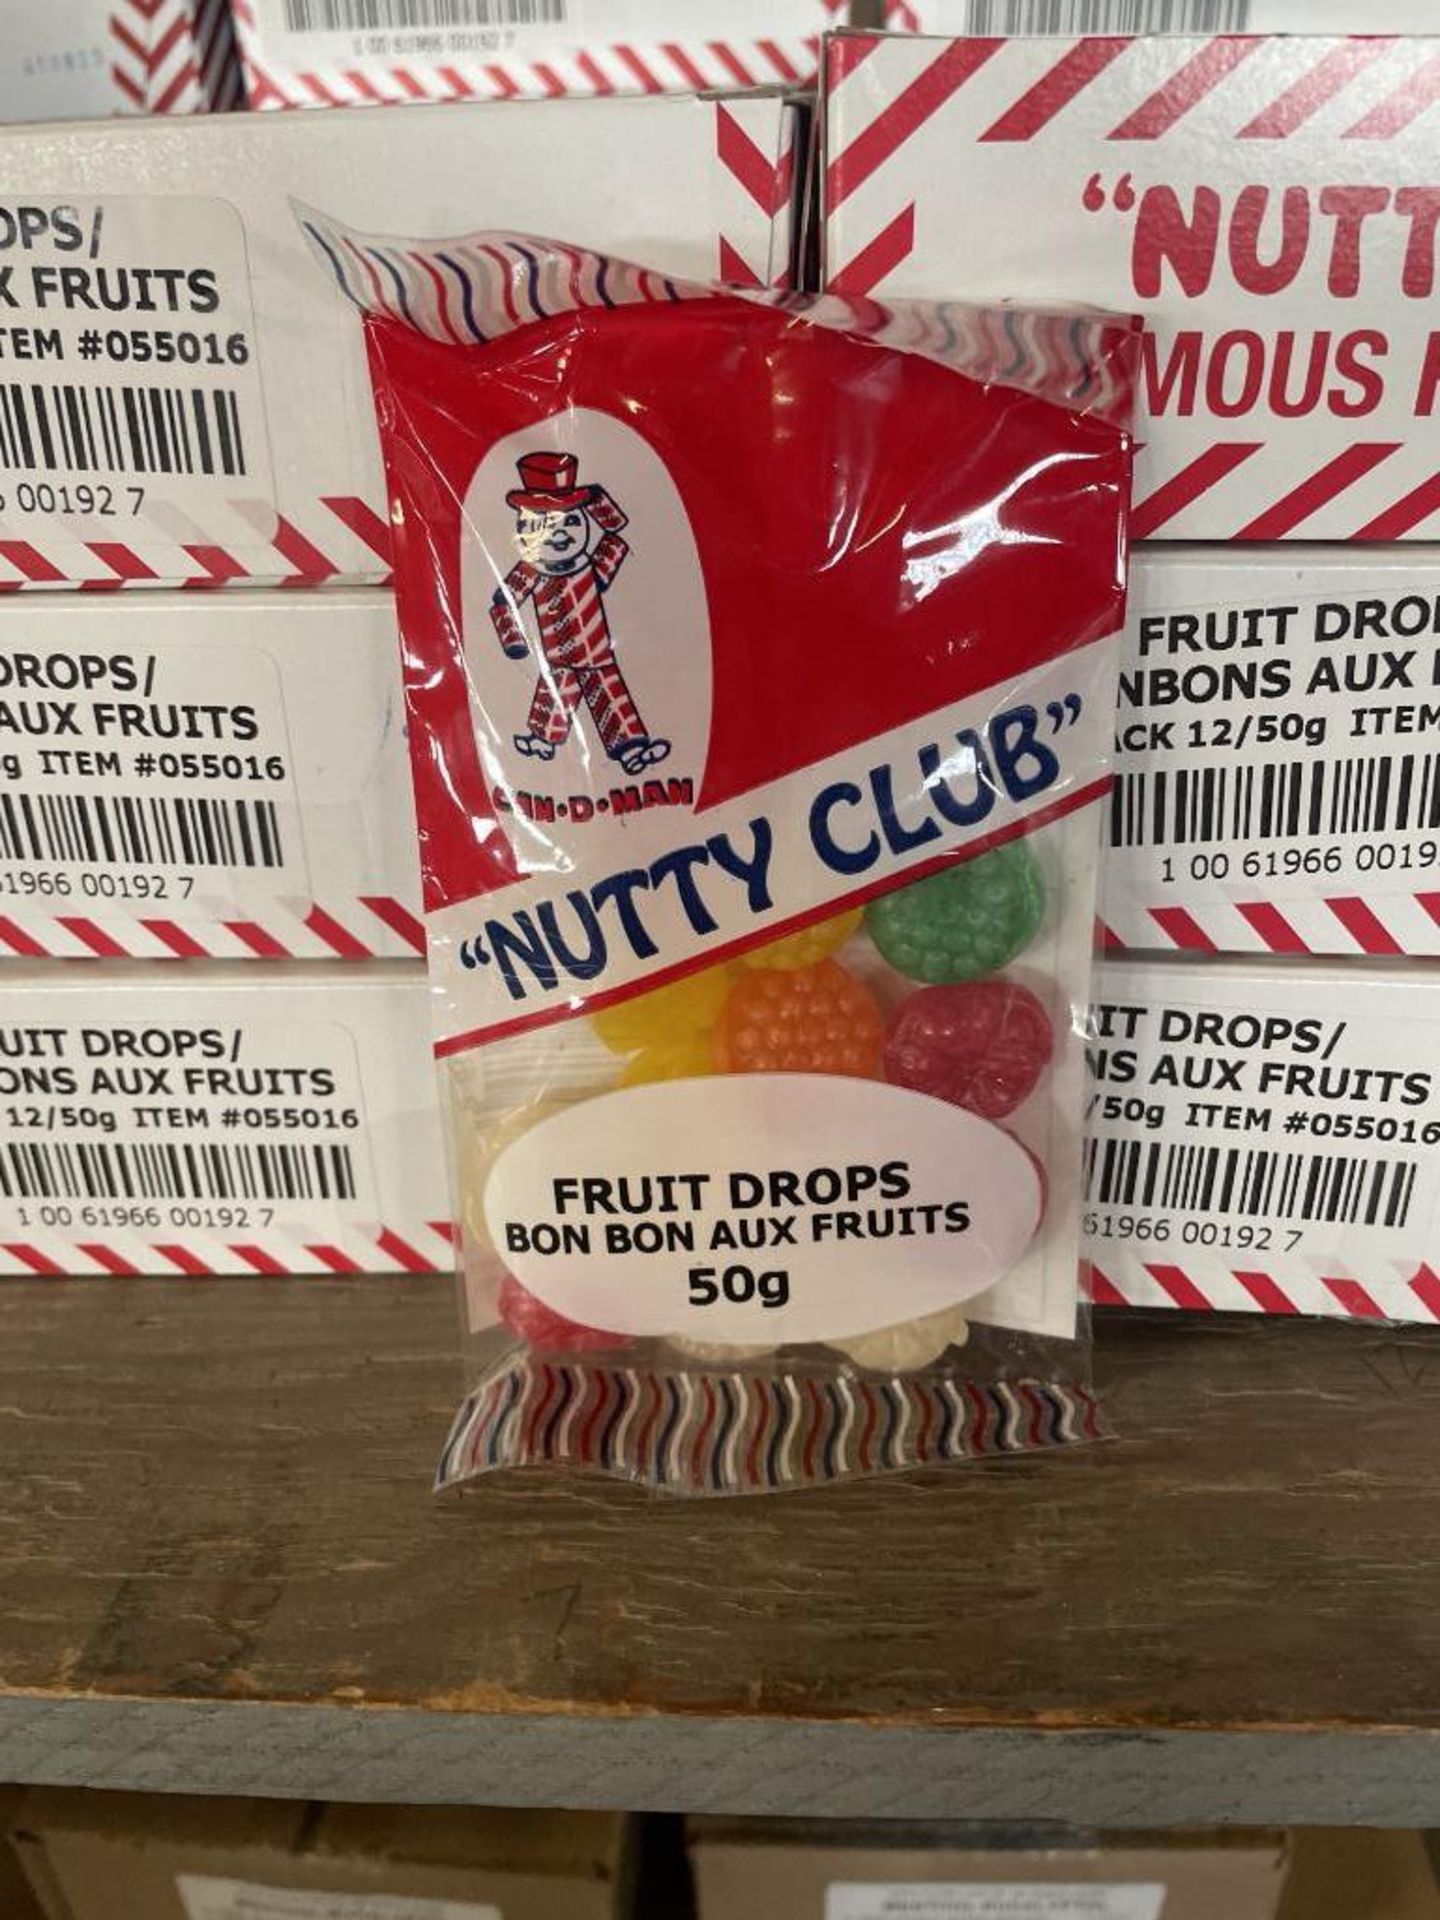 (21) BOXES OF NUTTY CLUB FRUIT DROPS, (7) 12/125G PER BOX & (14) 12/50G PER BOX - Image 3 of 3